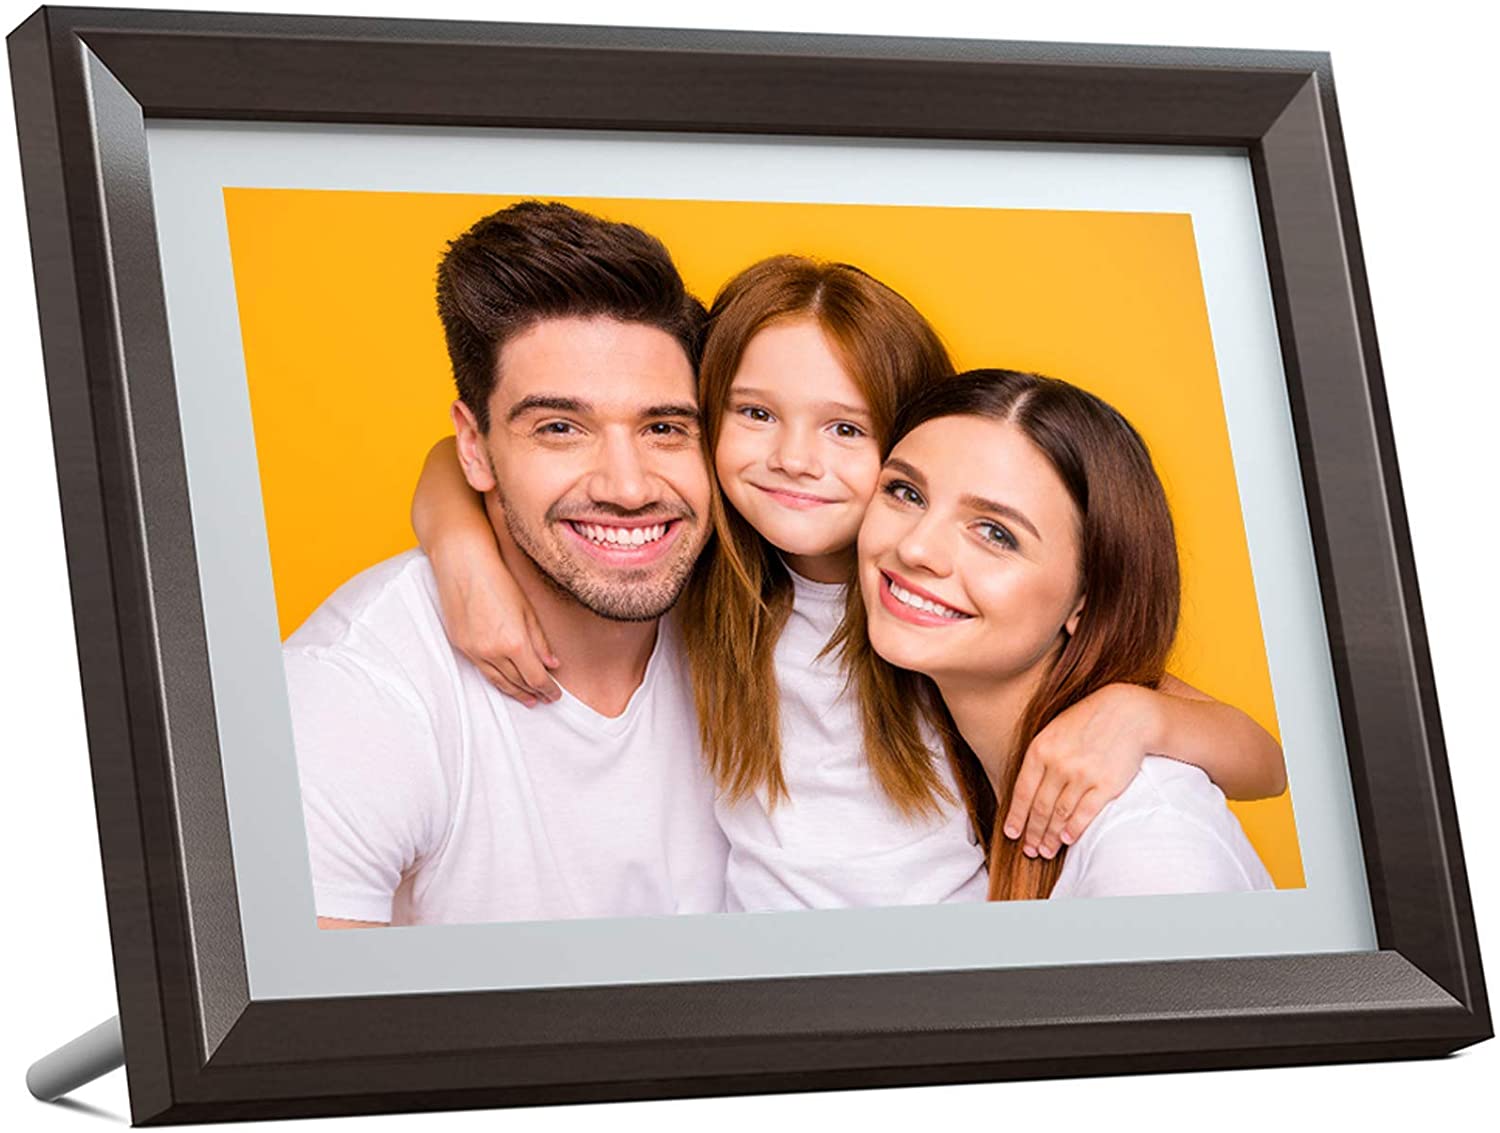 Dragon touch digital photo frame classic 10 elite 10 inch New